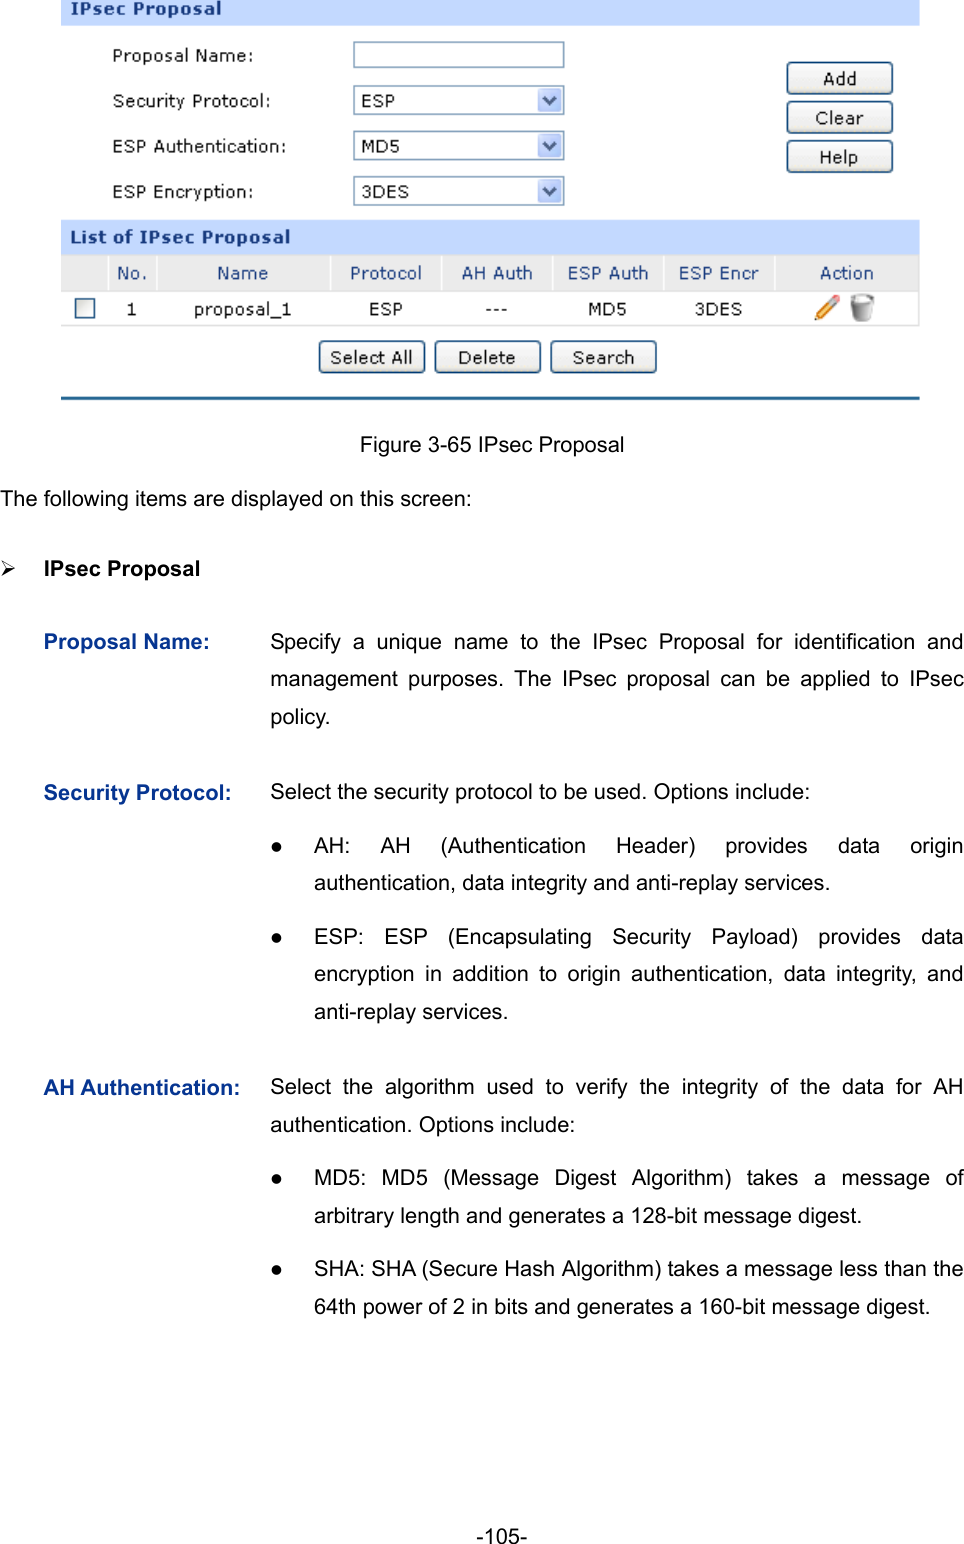  -105-  Figure 3-65 IPsec Proposal The following items are displayed on this screen: ¾ IPsec Proposal   Proposal Name:  Specify a unique name to the IPsec Proposal for identification and management purposes. The IPsec proposal can be applied to IPsec policy.  Security Protocol:  Select the security protocol to be used. Options include: z AH: AH (Authentication Header) provides data origin authentication, data integrity and anti-replay services.   z ESP: ESP (Encapsulating Security Payload) provides data encryption in addition to origin authentication, data integrity, and anti-replay services. AH Authentication:  Select the algorithm used to verify the integrity of the data for AH authentication. Options include: z MD5: MD5 (Message Digest Algorithm) takes a message of arbitrary length and generates a 128-bit message digest. z SHA: SHA (Secure Hash Algorithm) takes a message less than the 64th power of 2 in bits and generates a 160-bit message digest. 